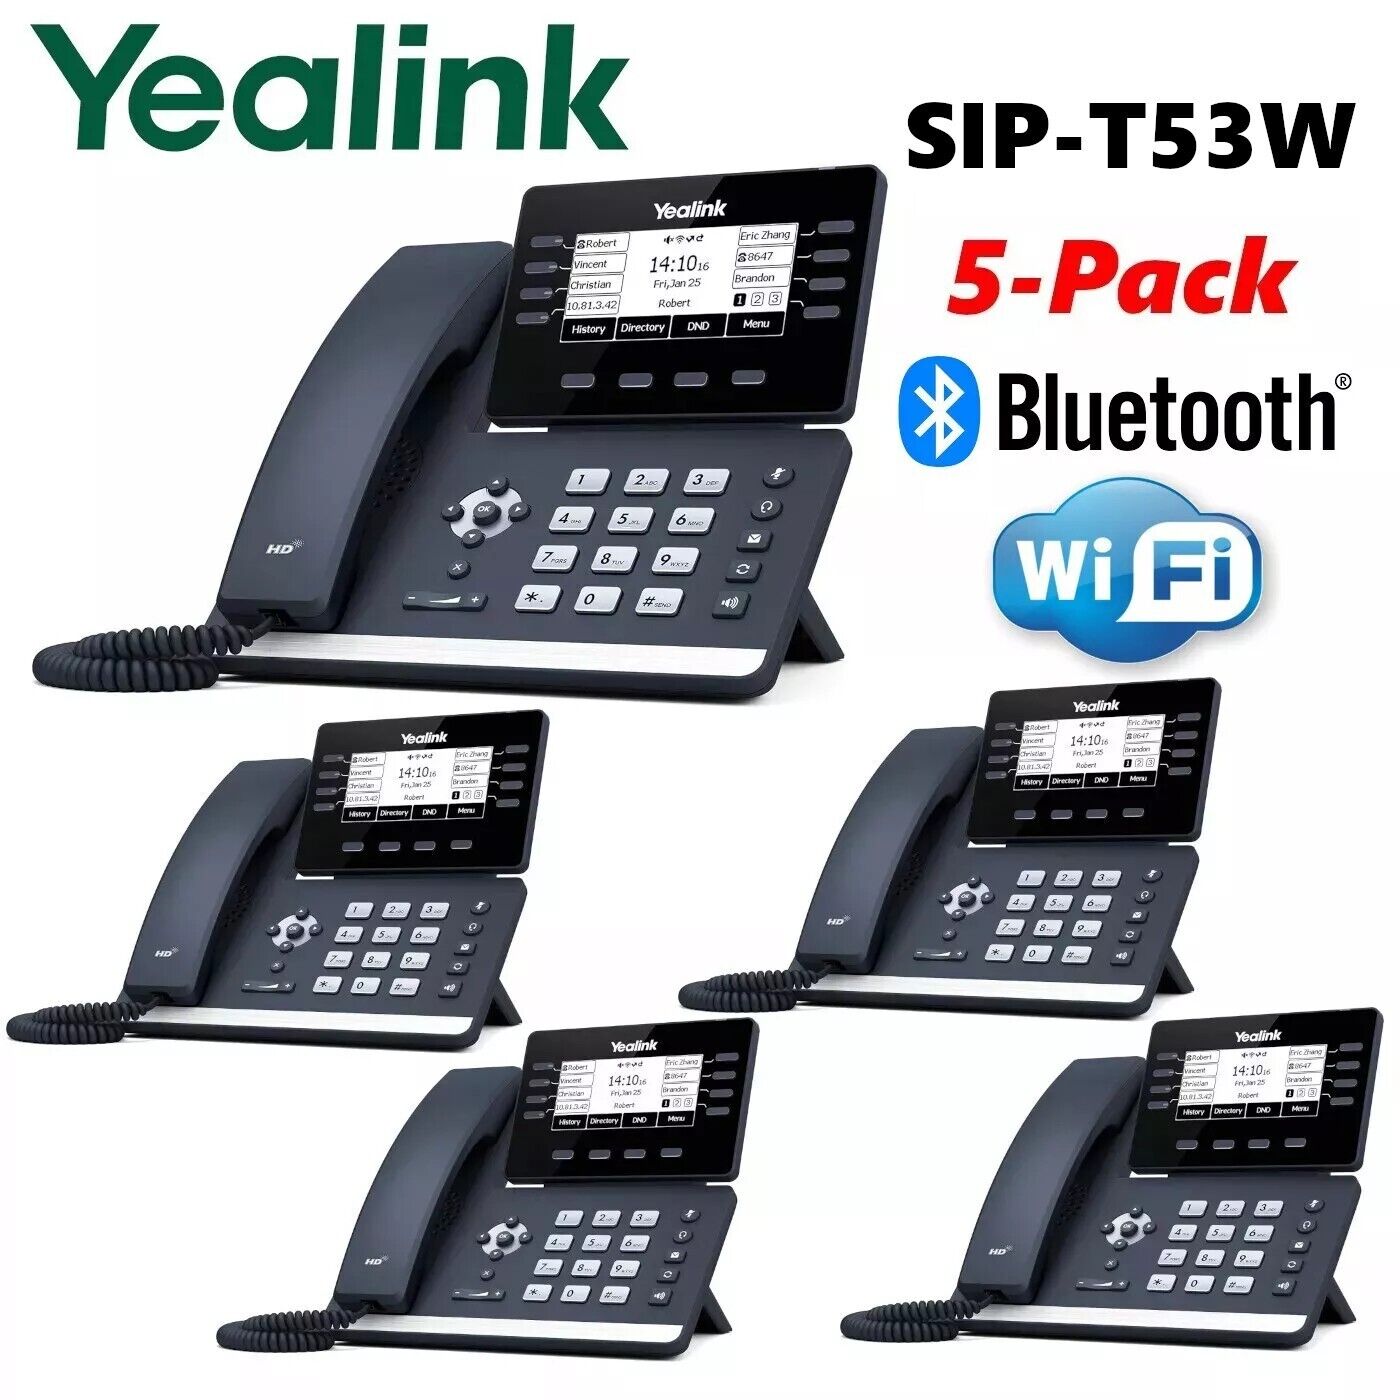 5 Pack Lot Yealink SIP-T53W Prime Business Phone T53W Entry Level Bluetooth WiFi